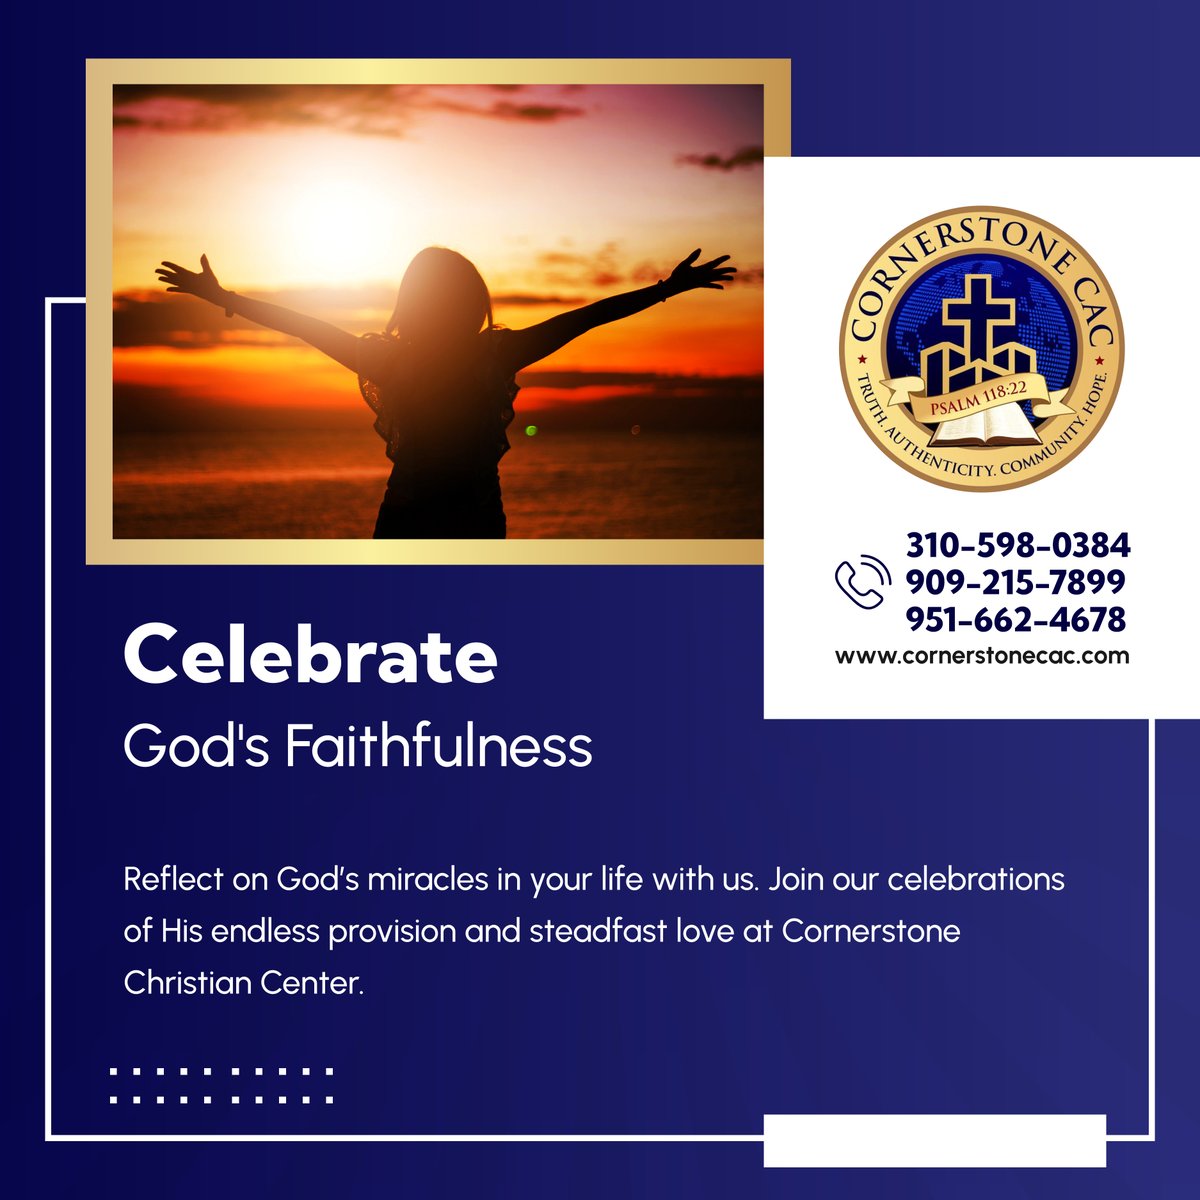 Join us at Cornerstone Christian Center as we celebrate the miraculous ways God has moved in our lives. Reflect on His provision and steadfast love, and find encouragement in our faith community.

#SanBernardinoCA #ReligiousOrganization #GodsLove